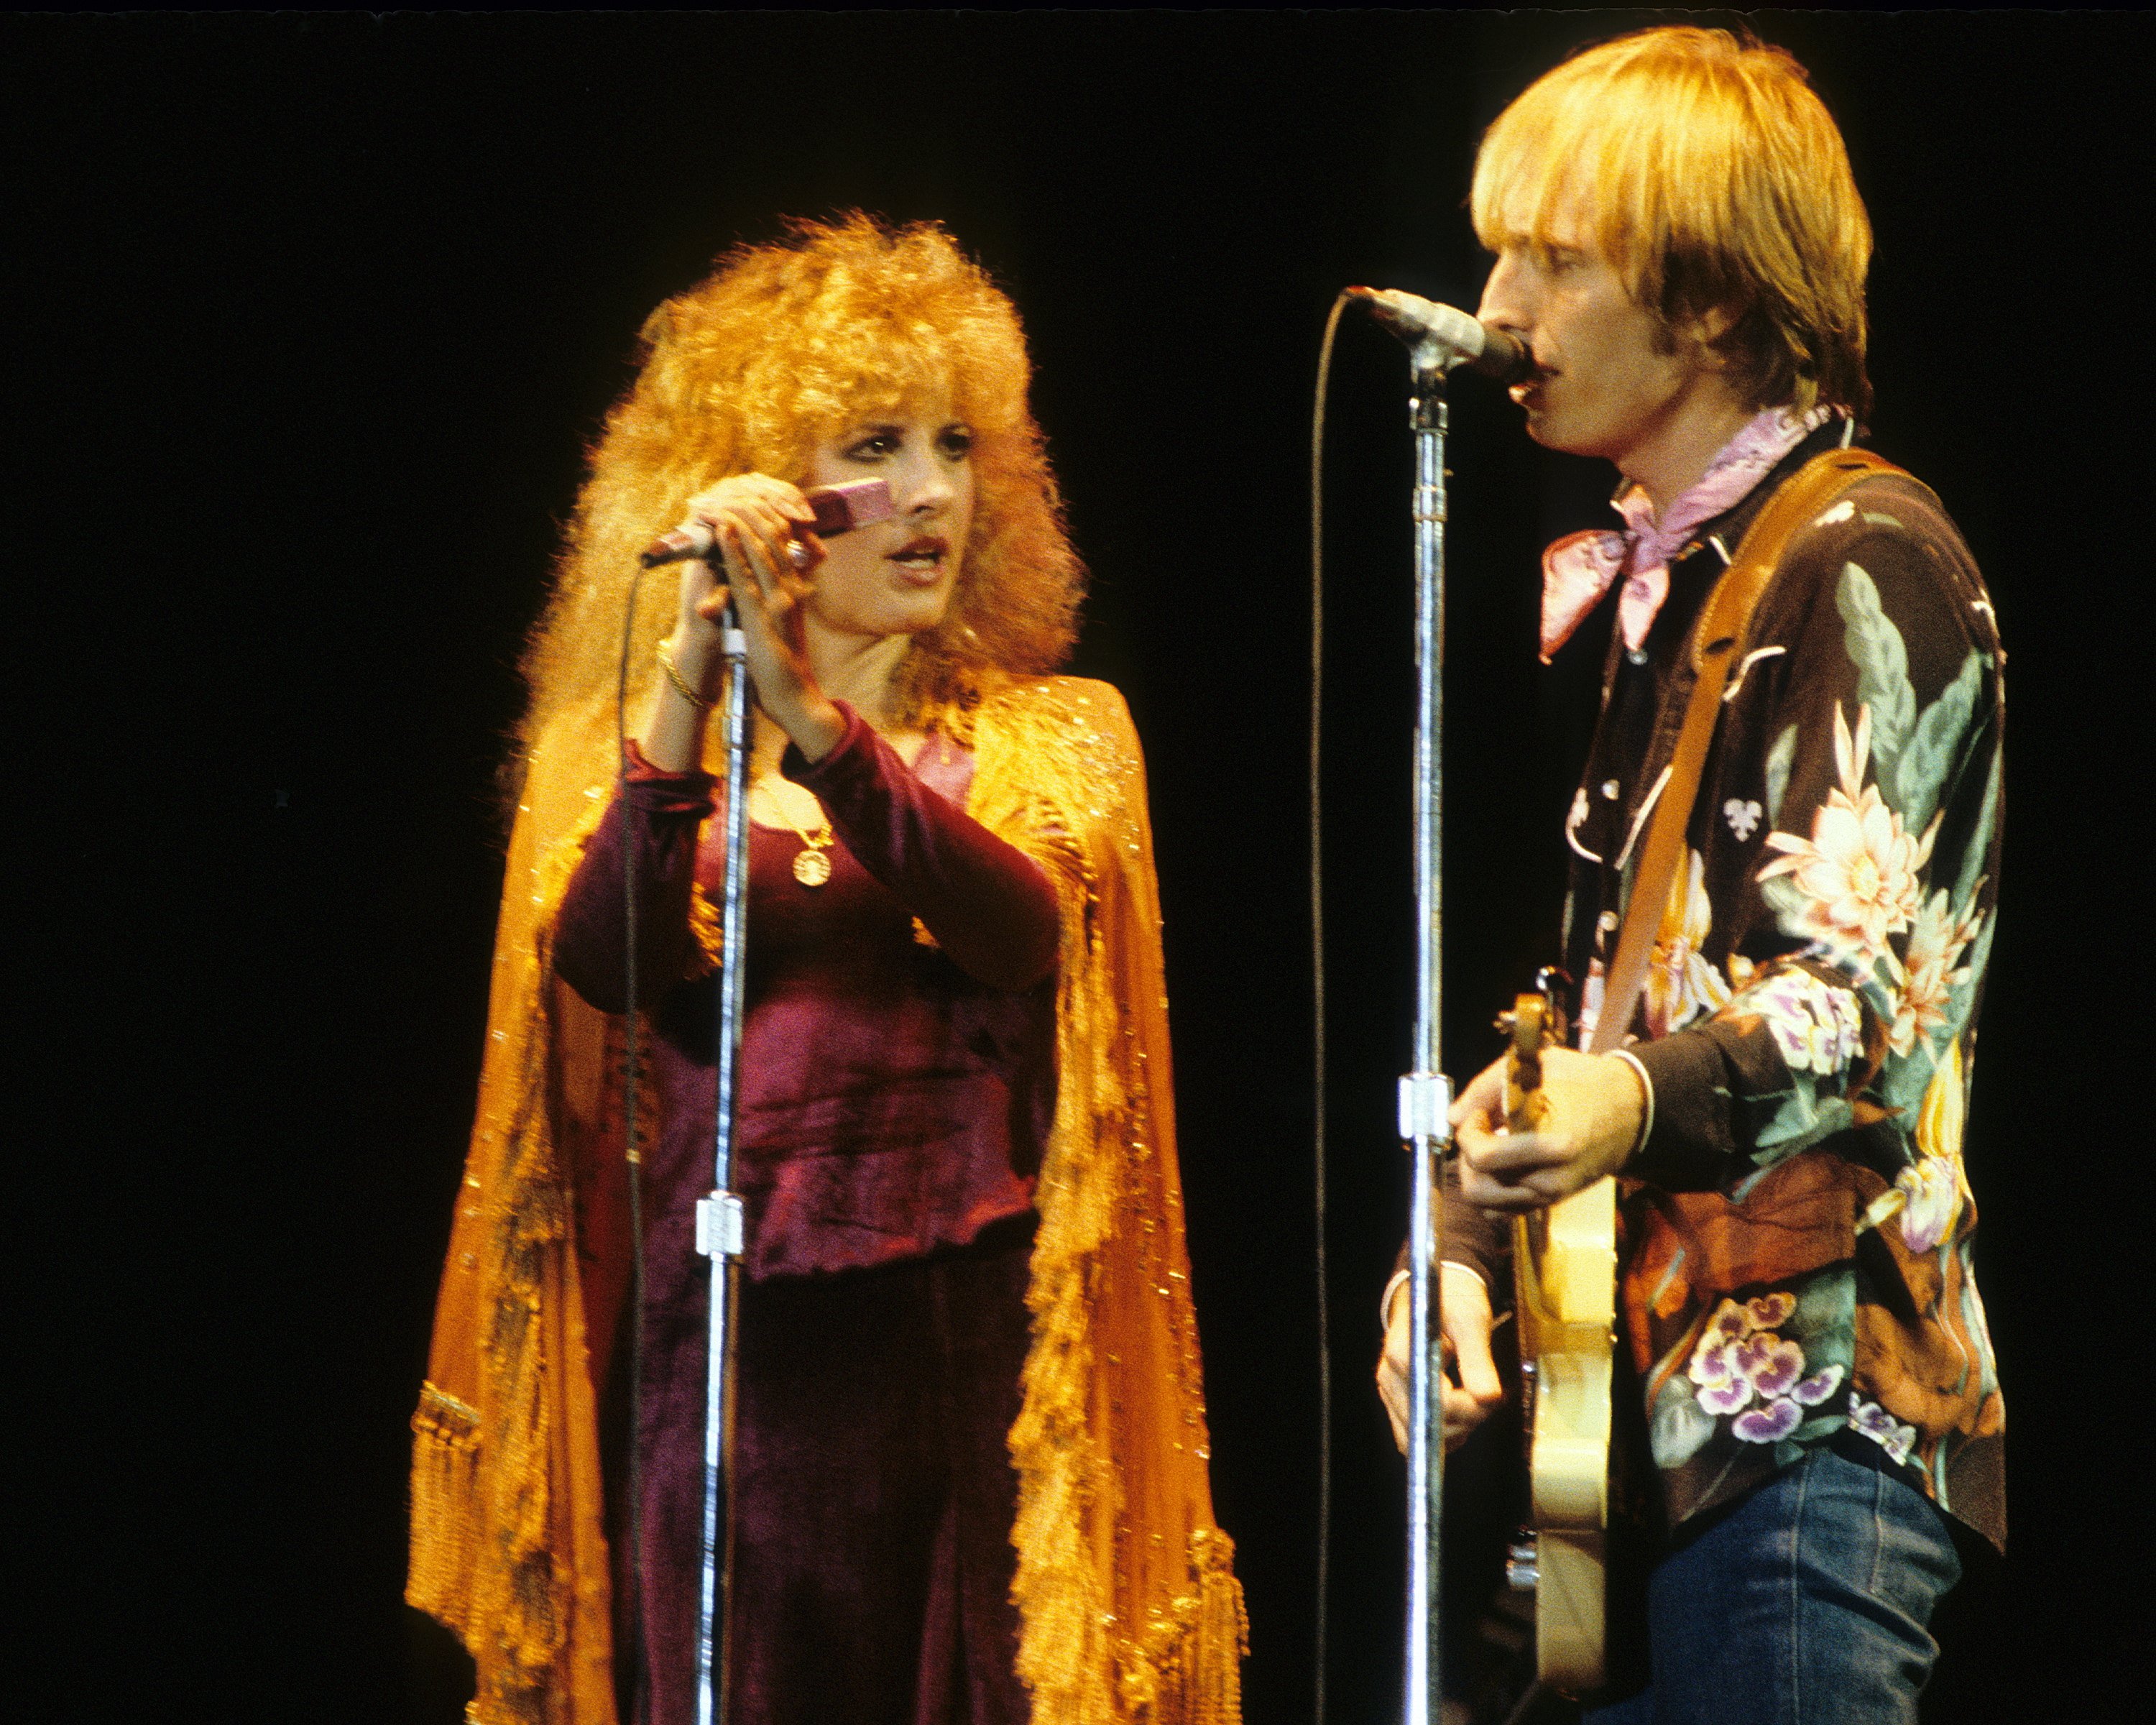 Stevie Nicks and Tom Petty stand in front of microphones and sing. Petty plays the guitar.